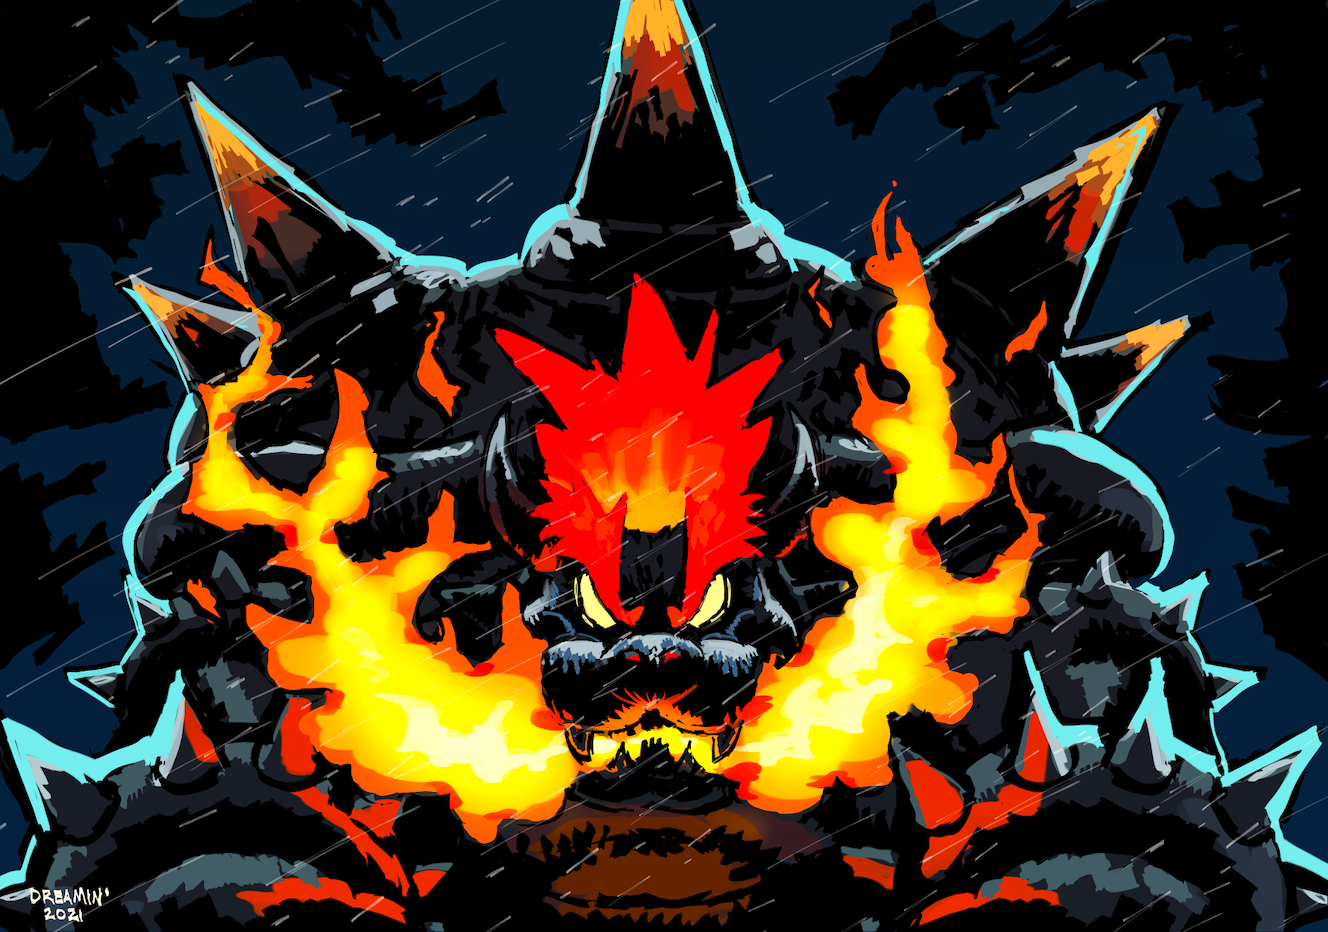 __bowser_and_mega_fury_bowser_mario_and_1_more_drawn_by_dreaminerryday__002233c6ab4130a30f42e905dad69e0f.png